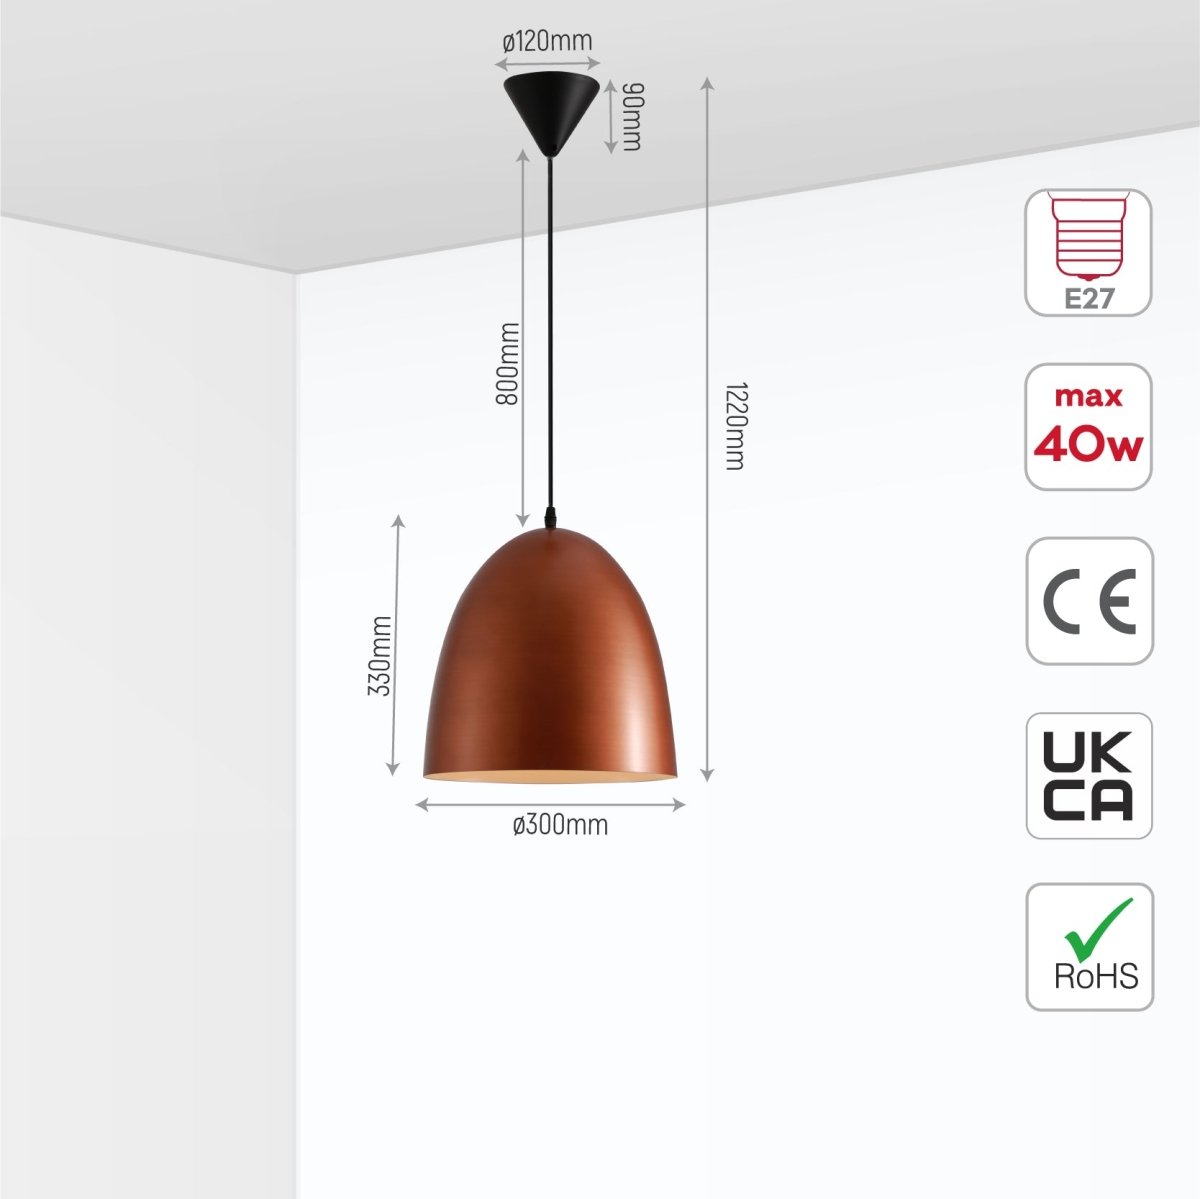 Size and specs of Antique Copper Dome Metal Pendant Ceiling Light with E27 Fitting D220 | TEKLED 150-18189